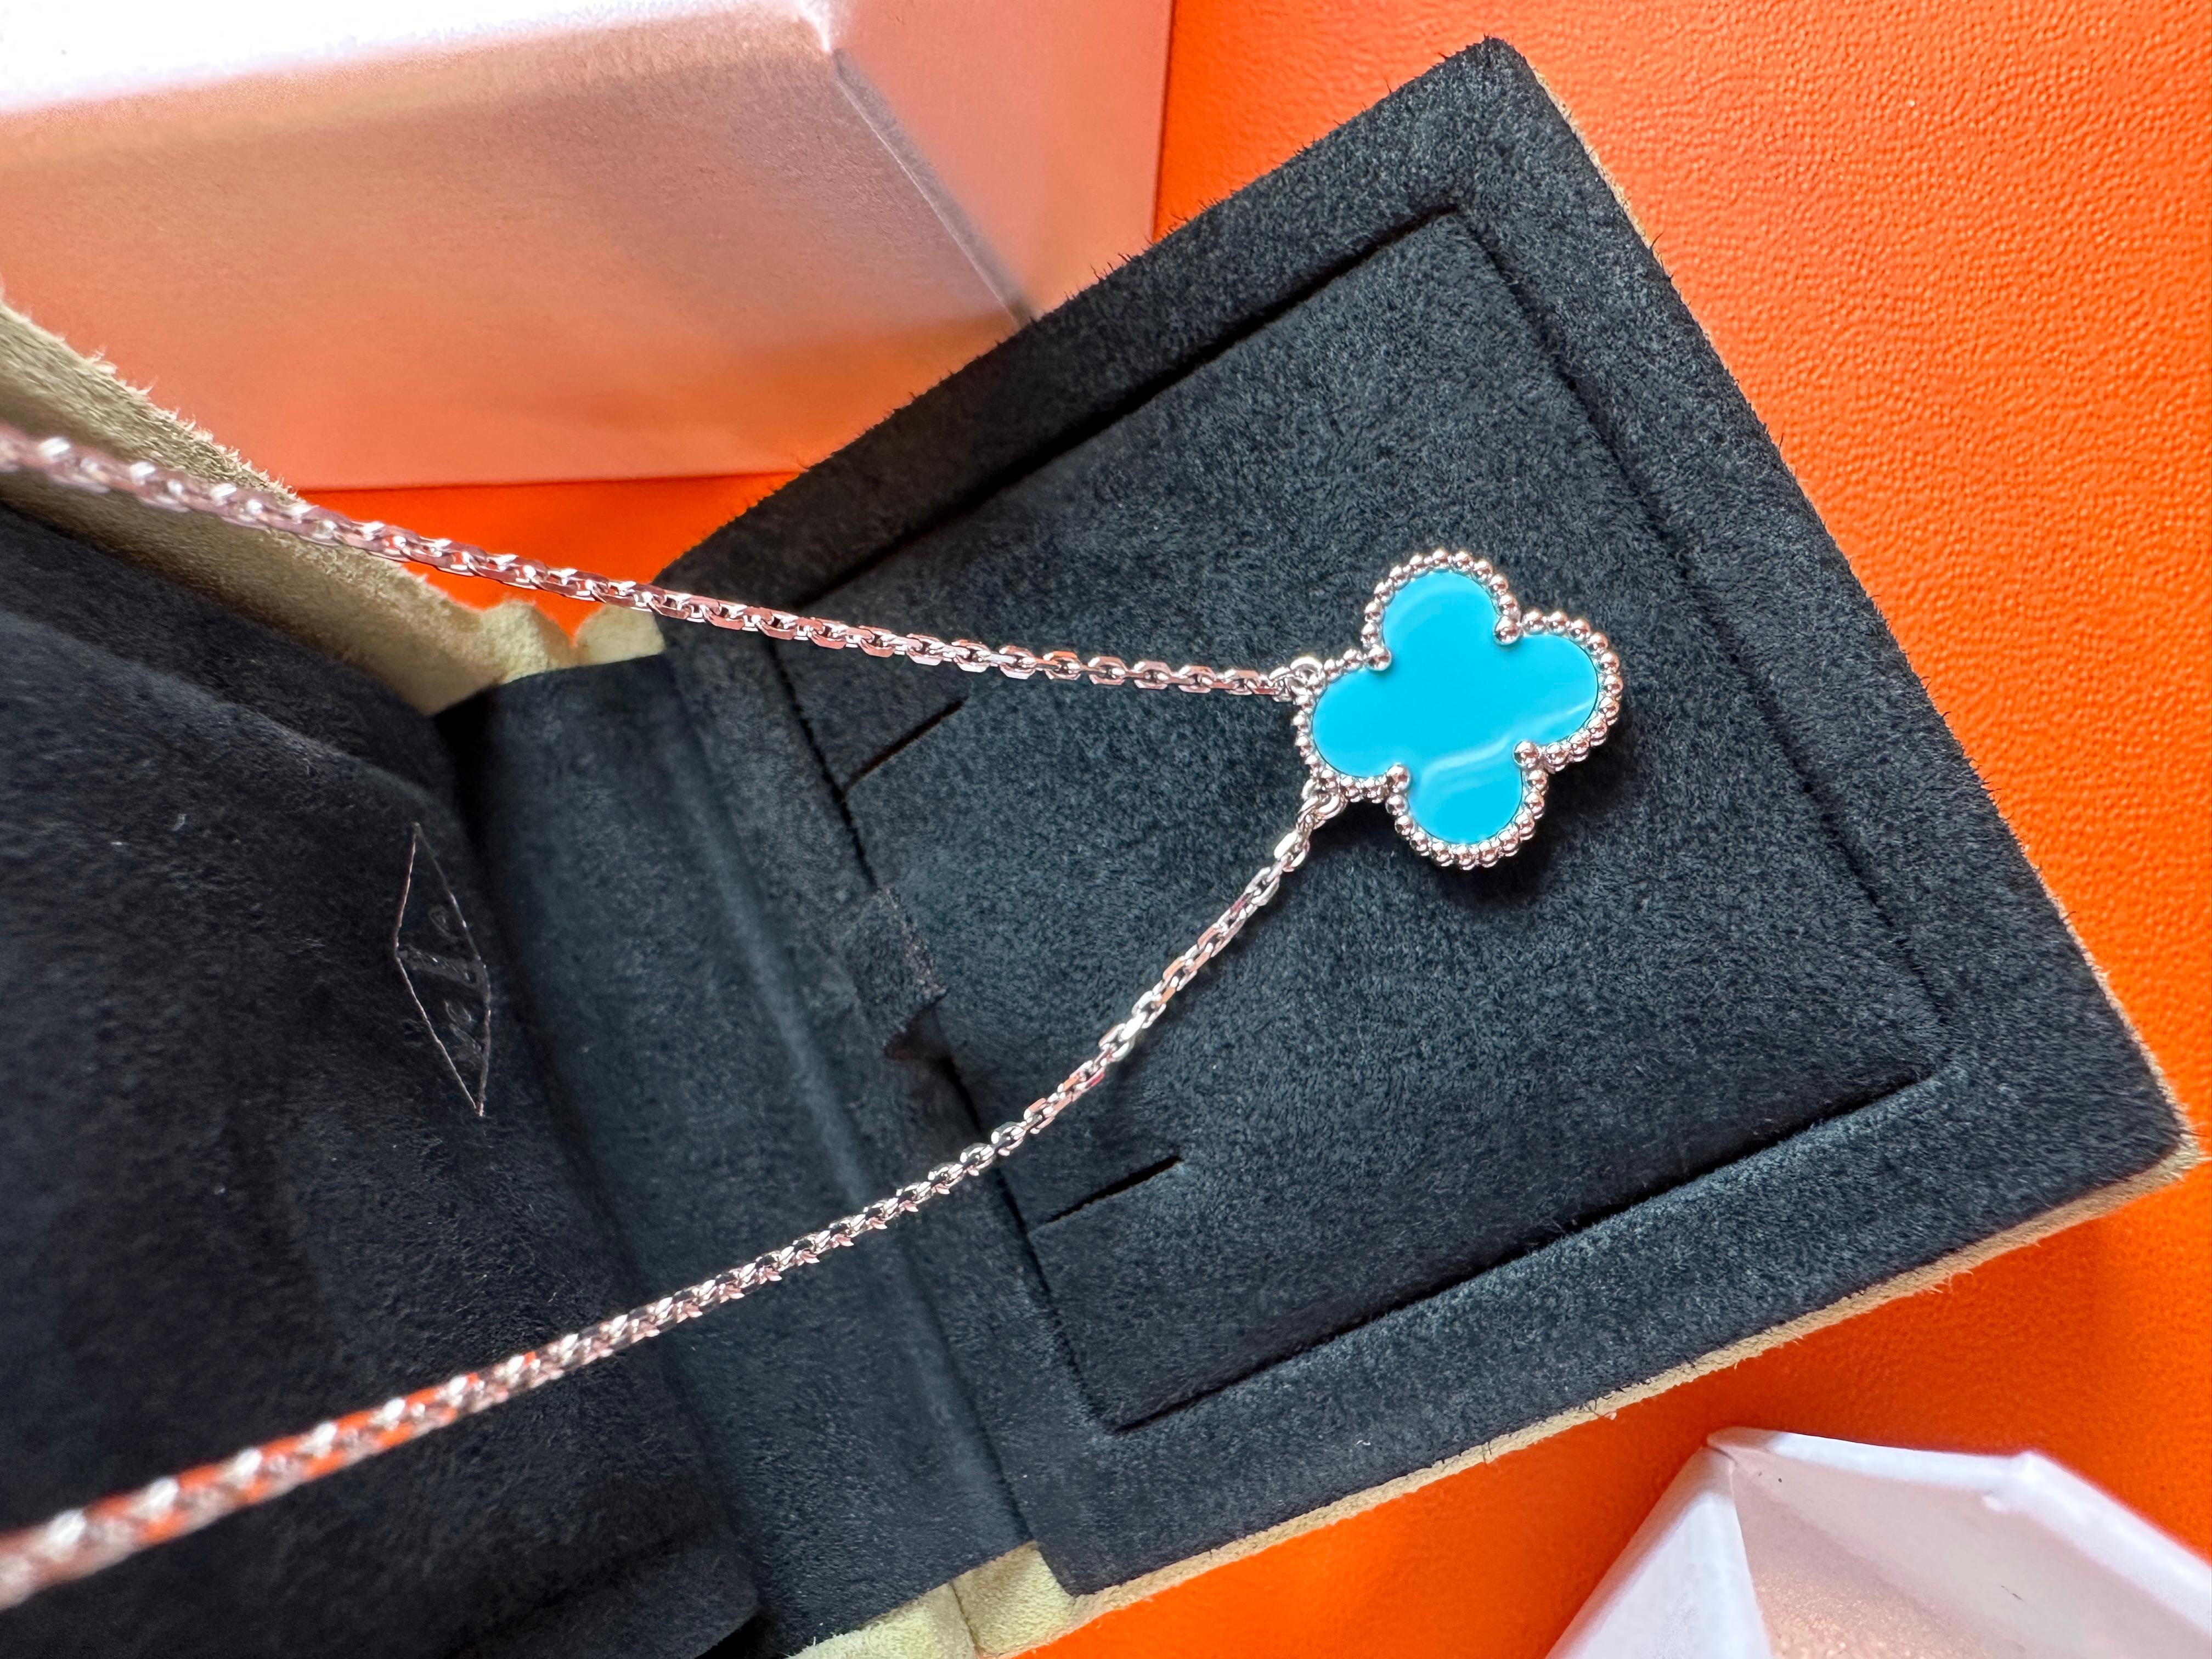 Super RARE Turquoise Vintage Alhambra Pendant Necklace.
No significant signs of wear. Turquoise is in immaculate shiny like-new condition.
No damage/discoloration. 
Comes with boxes and the necklace only.
Dated 2012.5.14 at VCA Singapore